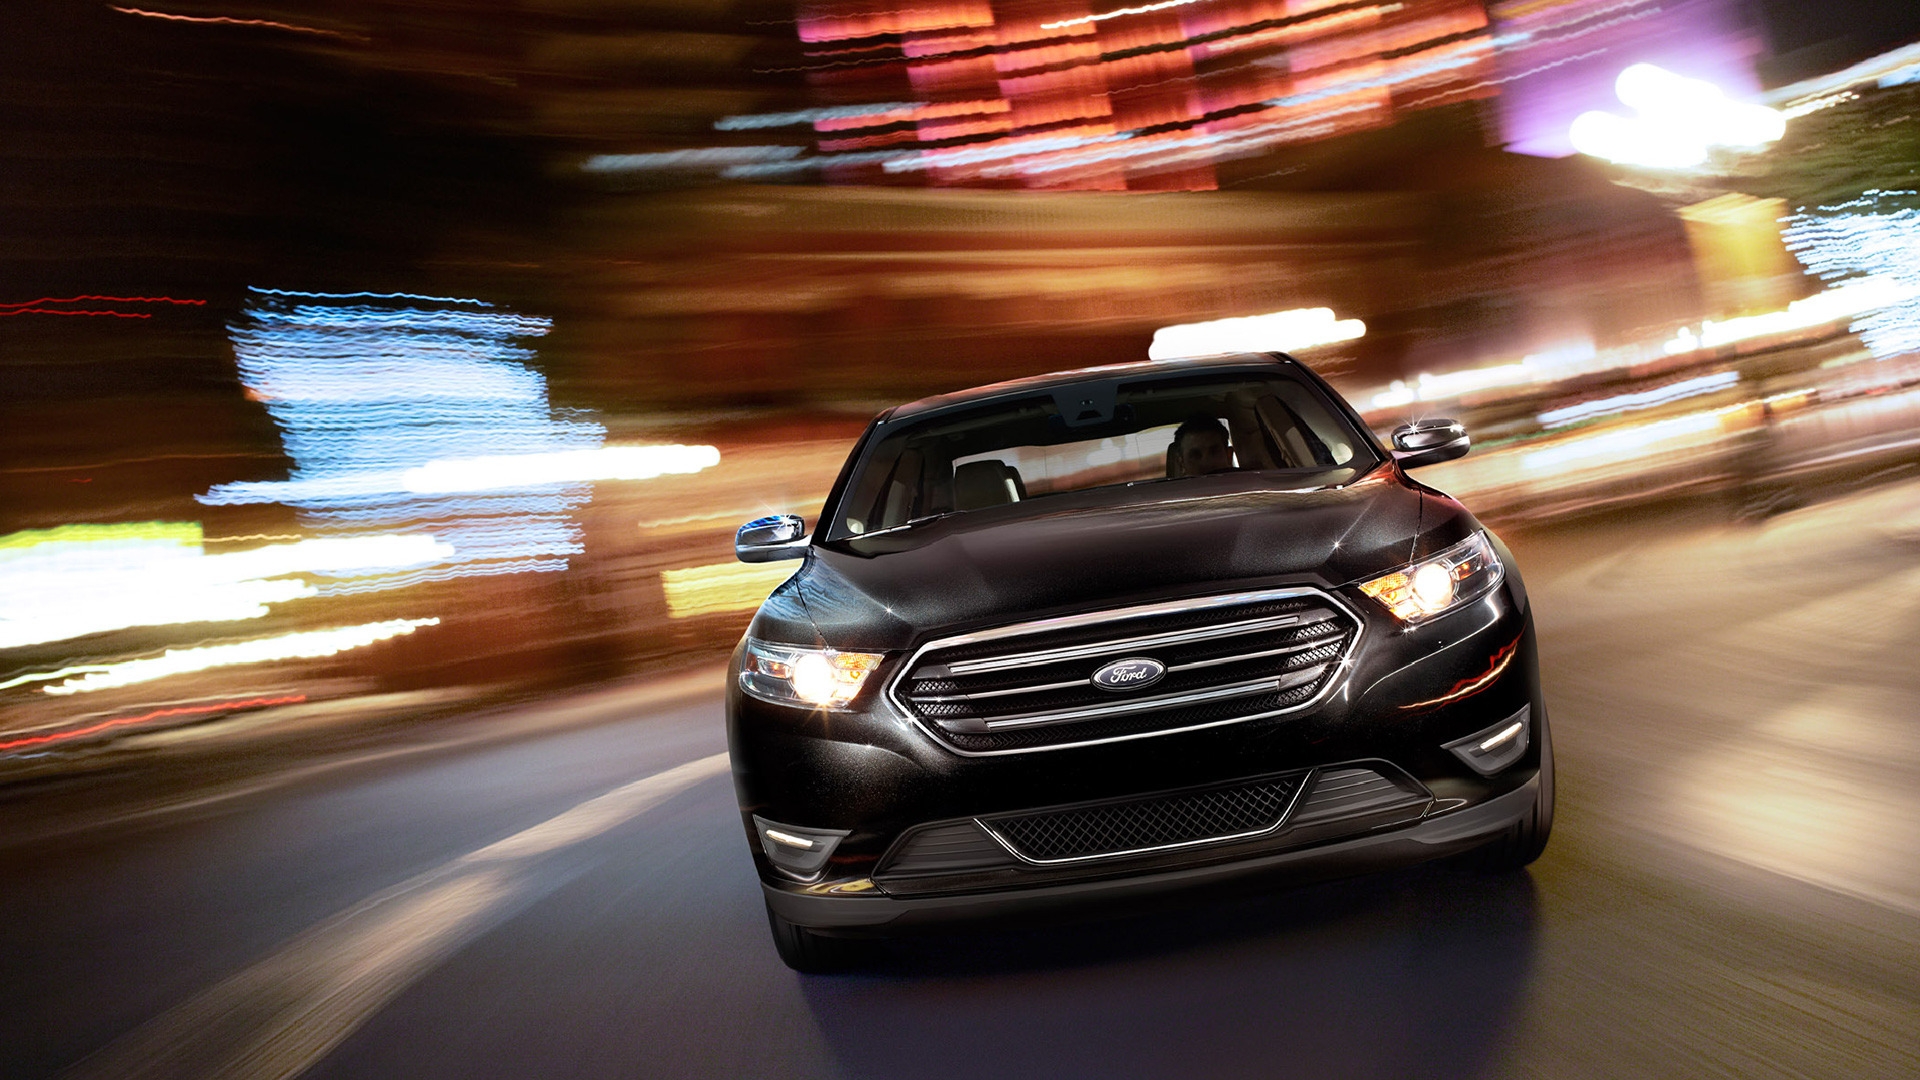 2013 Ford Taurus Limited for 1920 x 1080 HDTV 1080p resolution